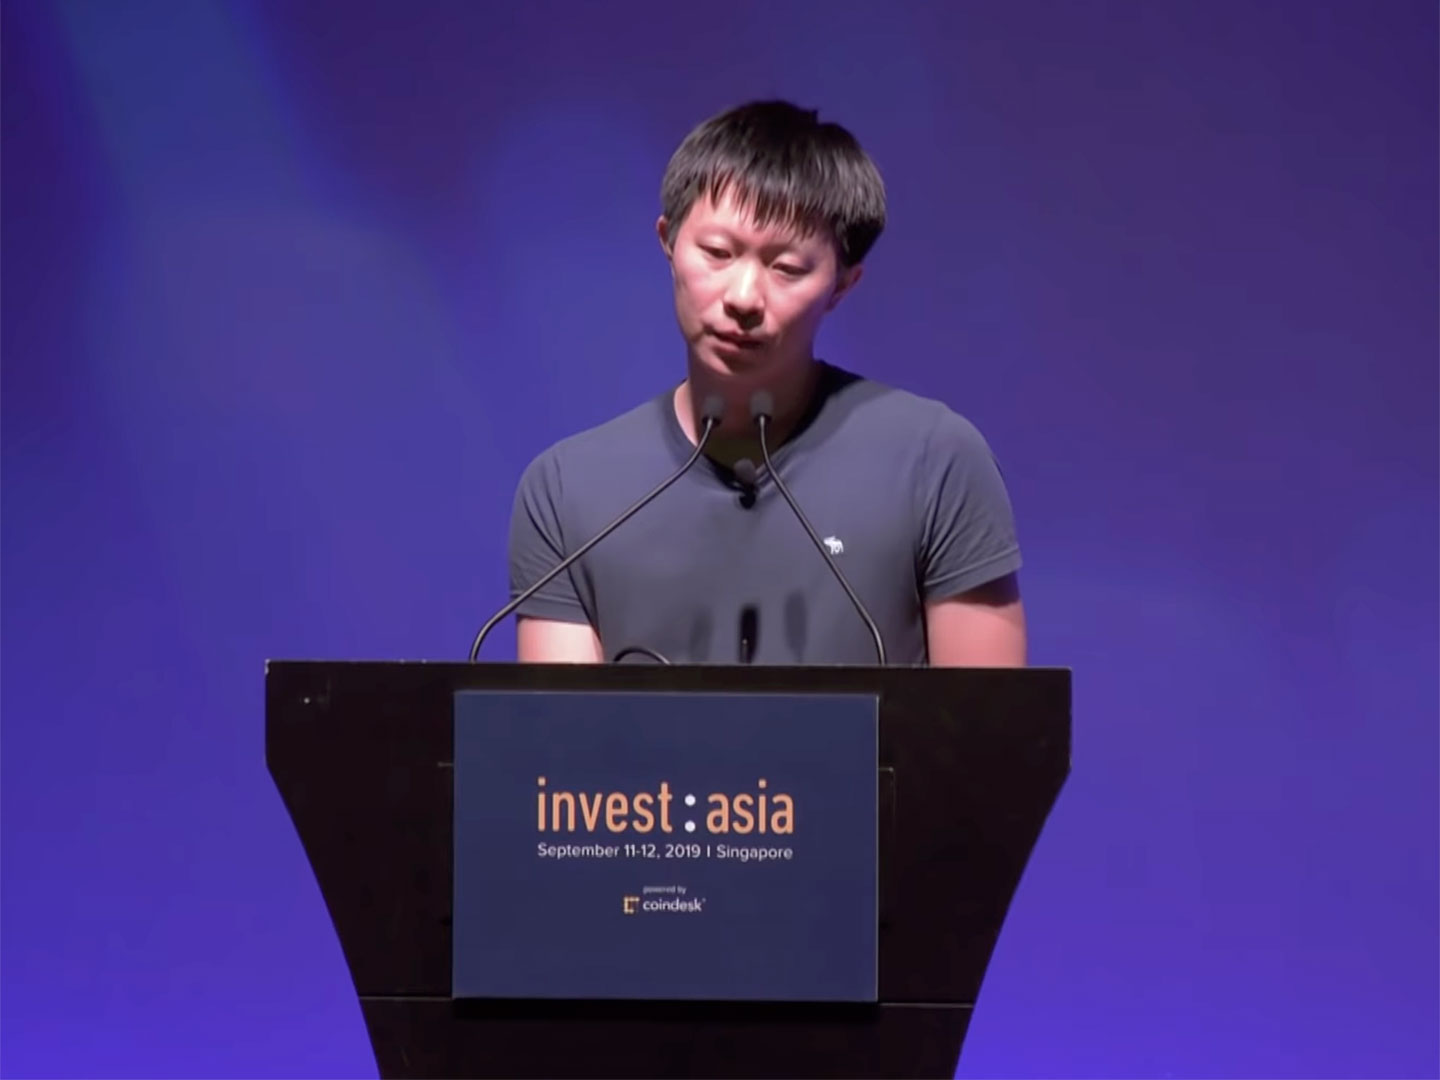 New Update: Co-founder Of Three Arrows Capital, Zhu, Arrested And Sentenced In Singapore Airport